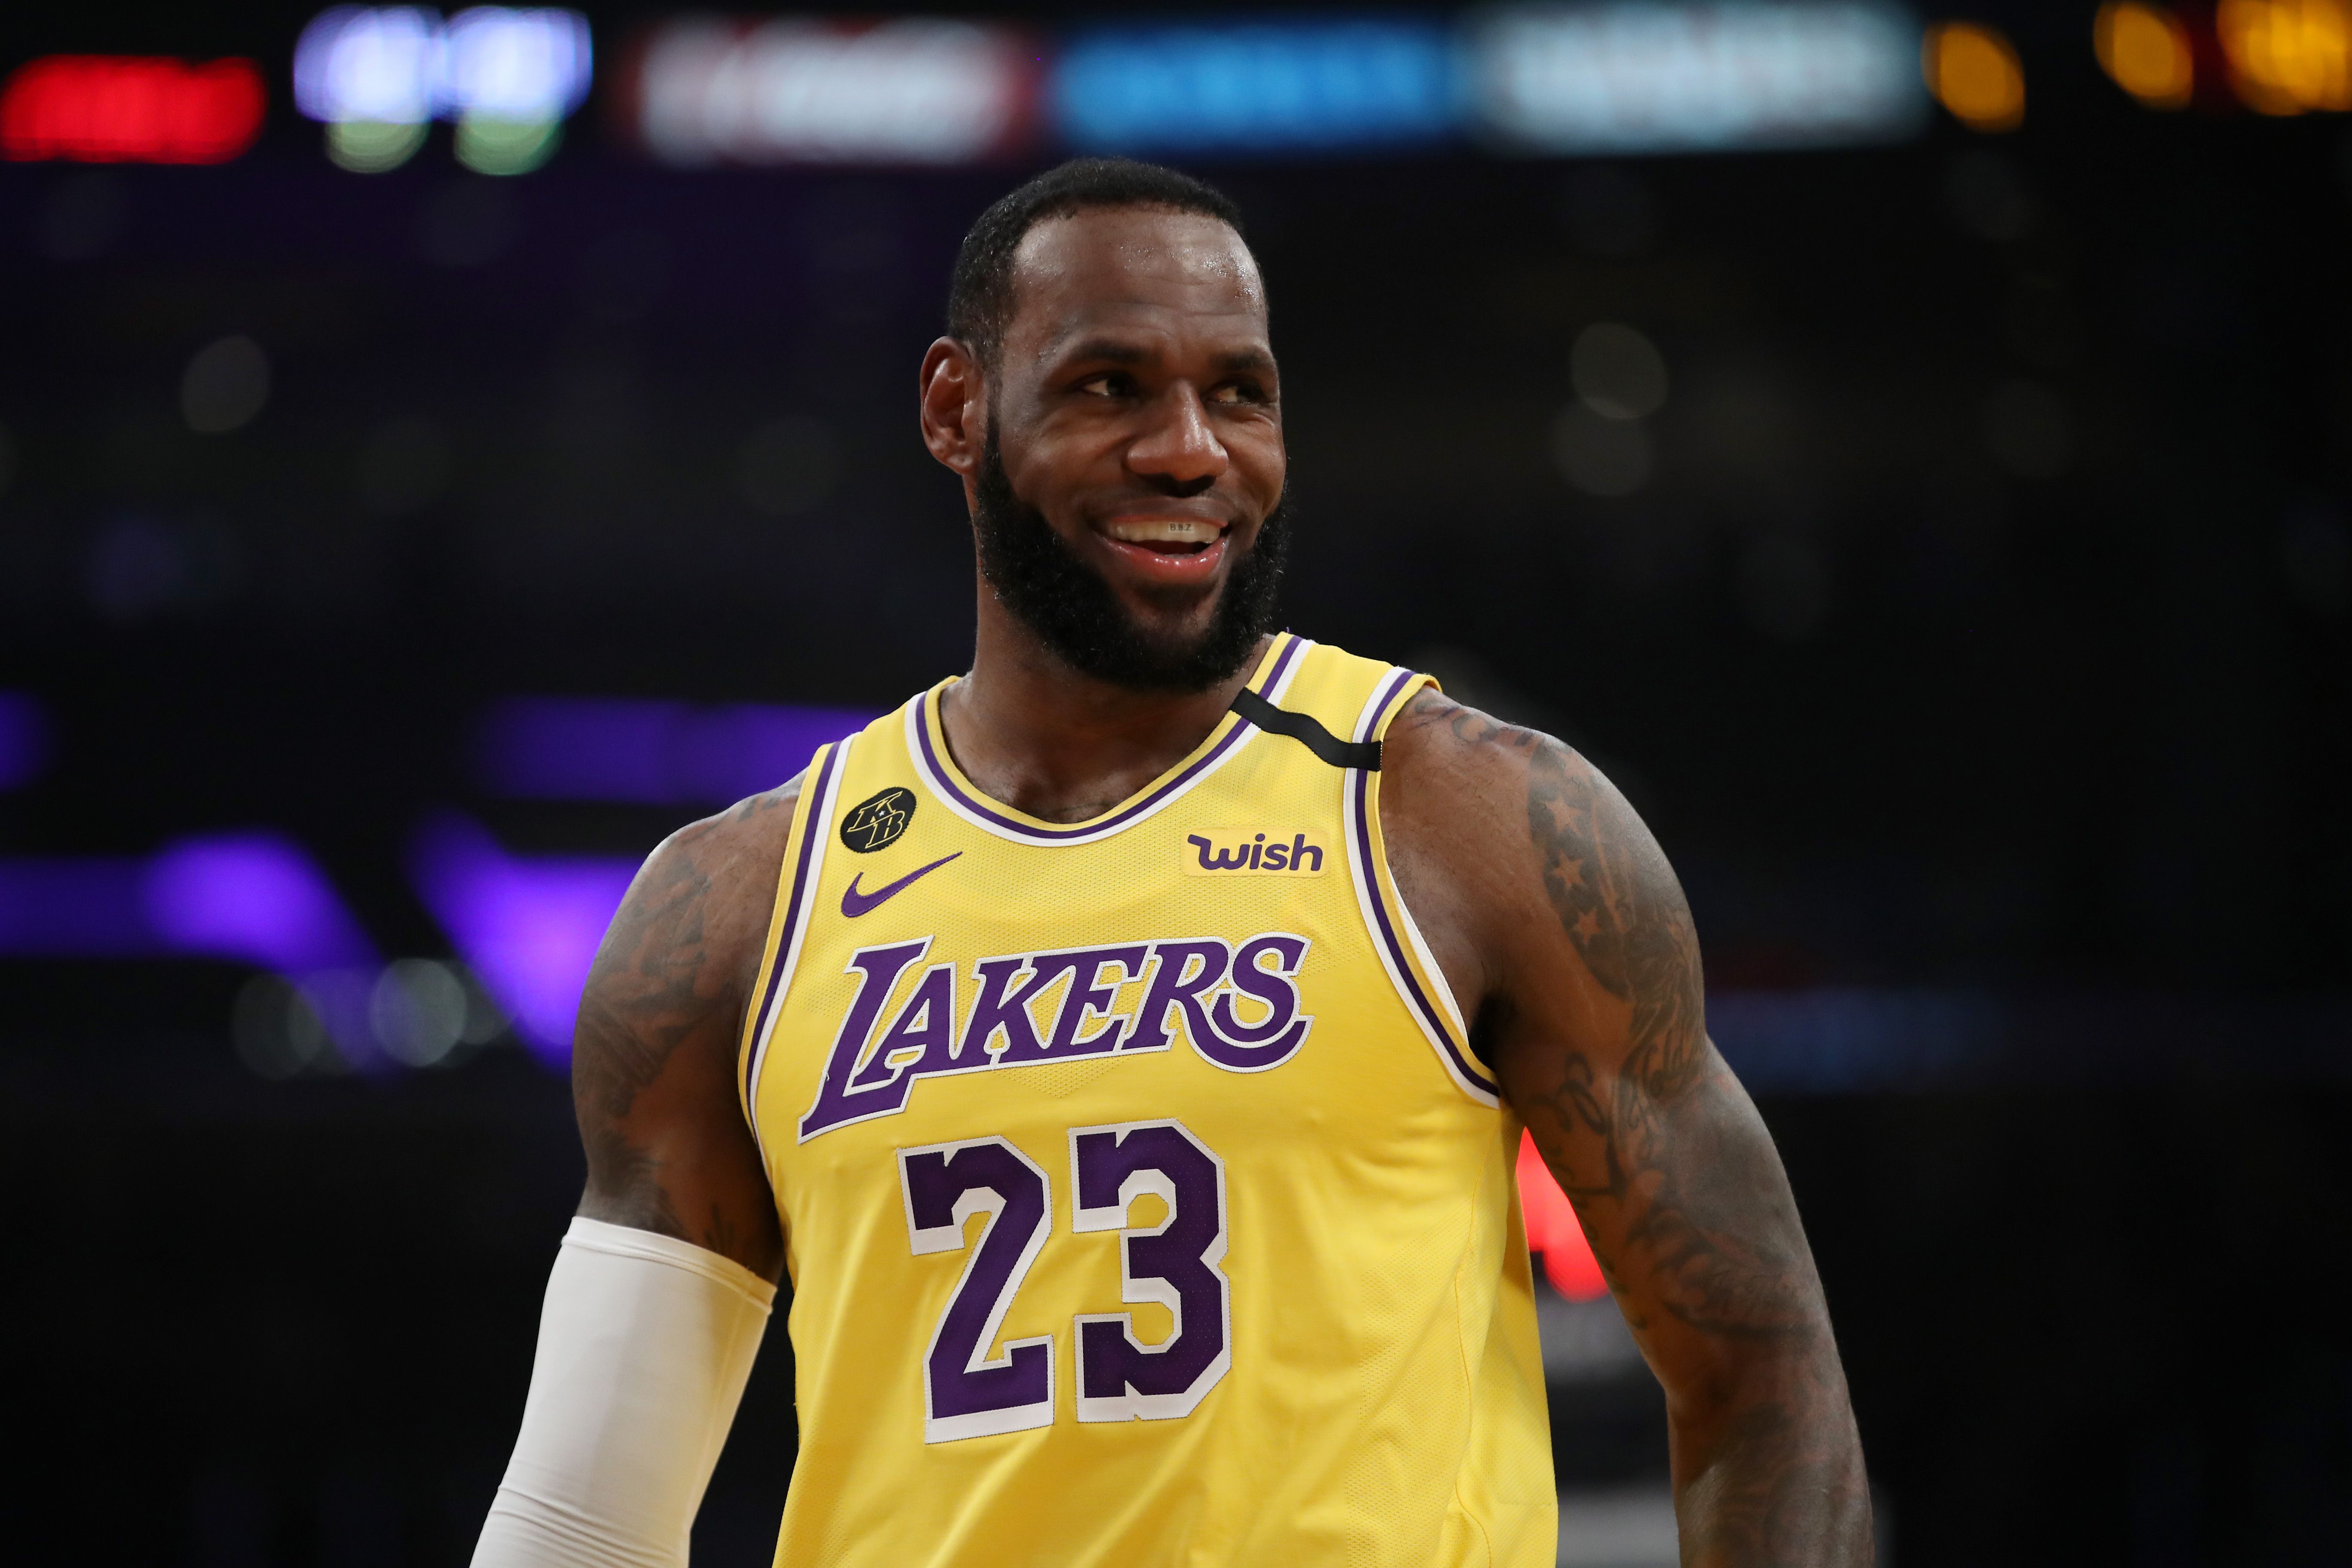 LeBron James: 'Definitely not giving up on the season' but health of players mustn't be jeopardized